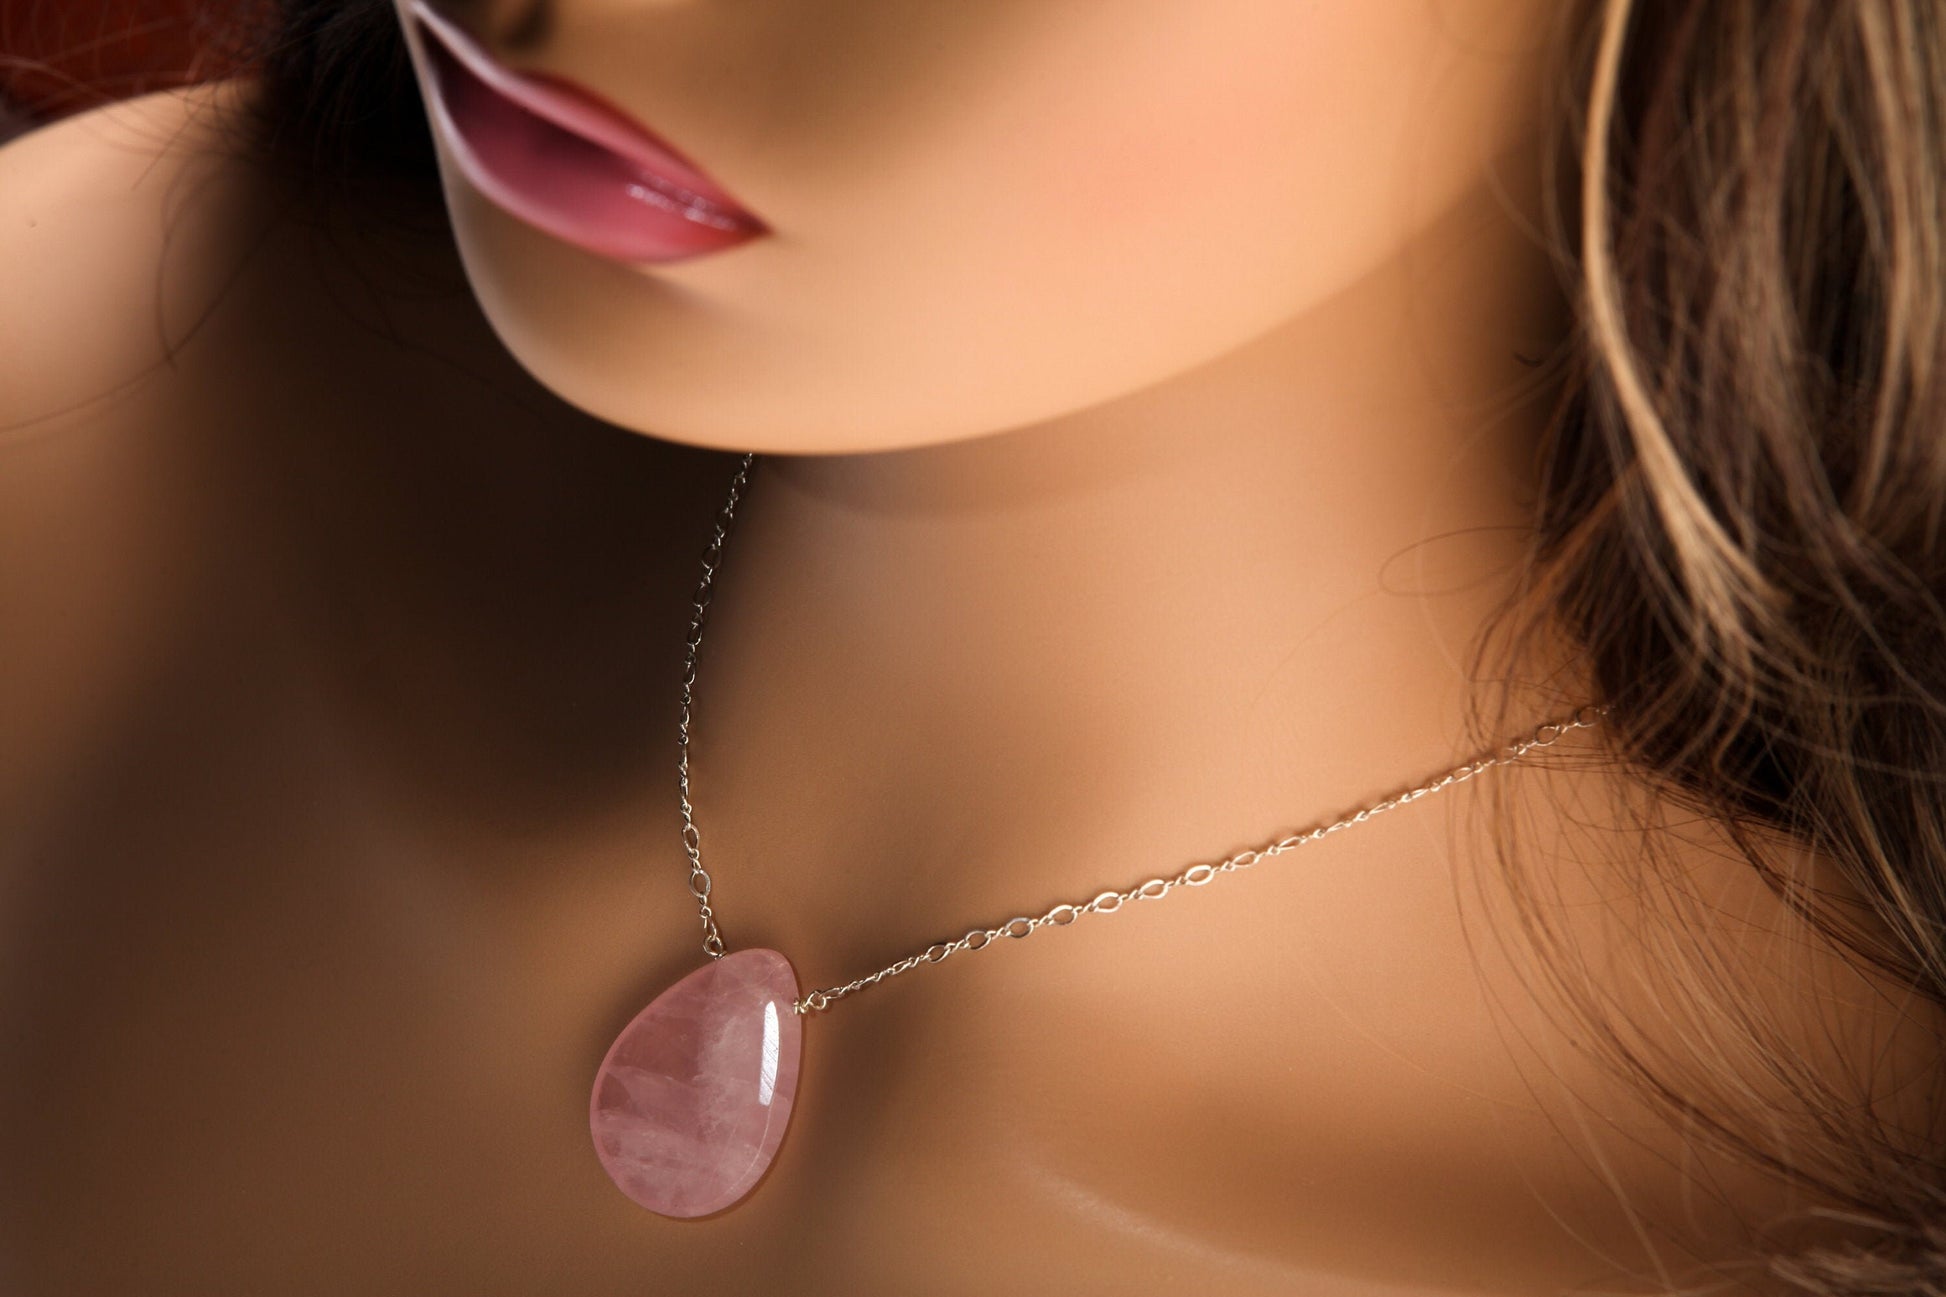 Madagascar Rose Quartz Faceted Pear Drop 18x25mm, Natural Gemstones in 925 Sterling Silver Chain or 14K Gold Filled Chain